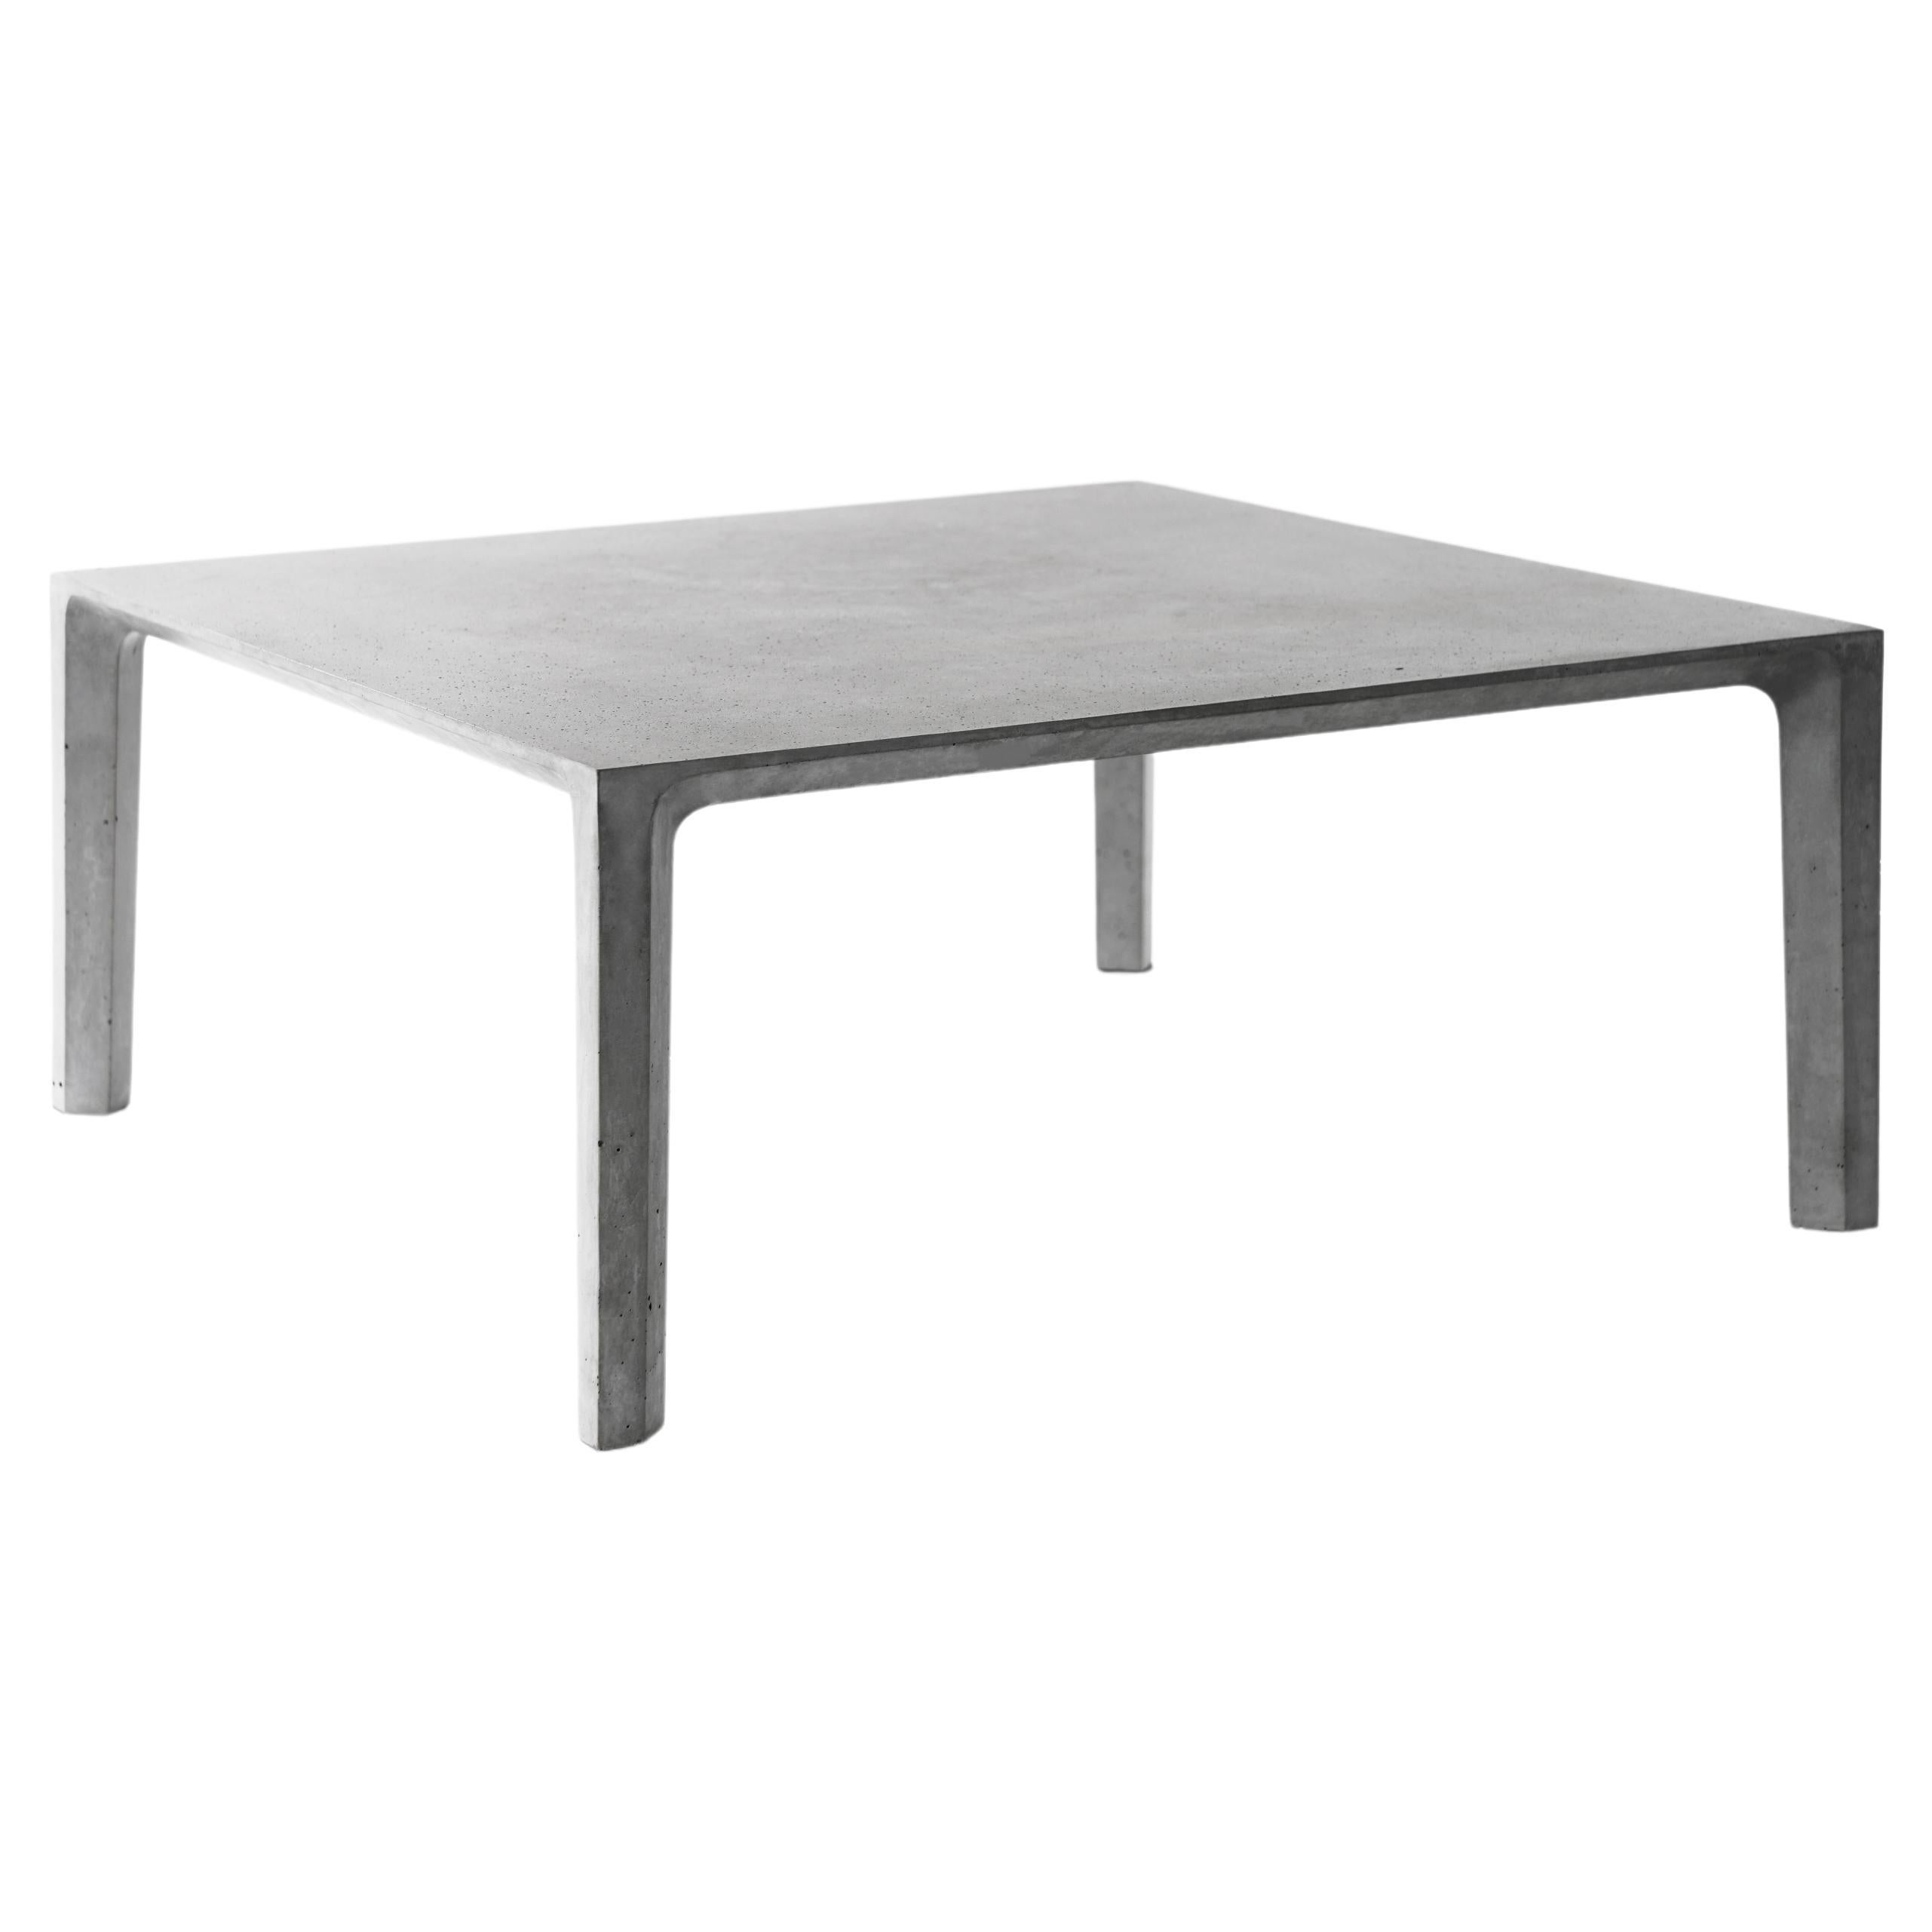 Contemporary Side Table / Coffee Table 'Jiong' Made of Concrete, by Bentu Design For Sale